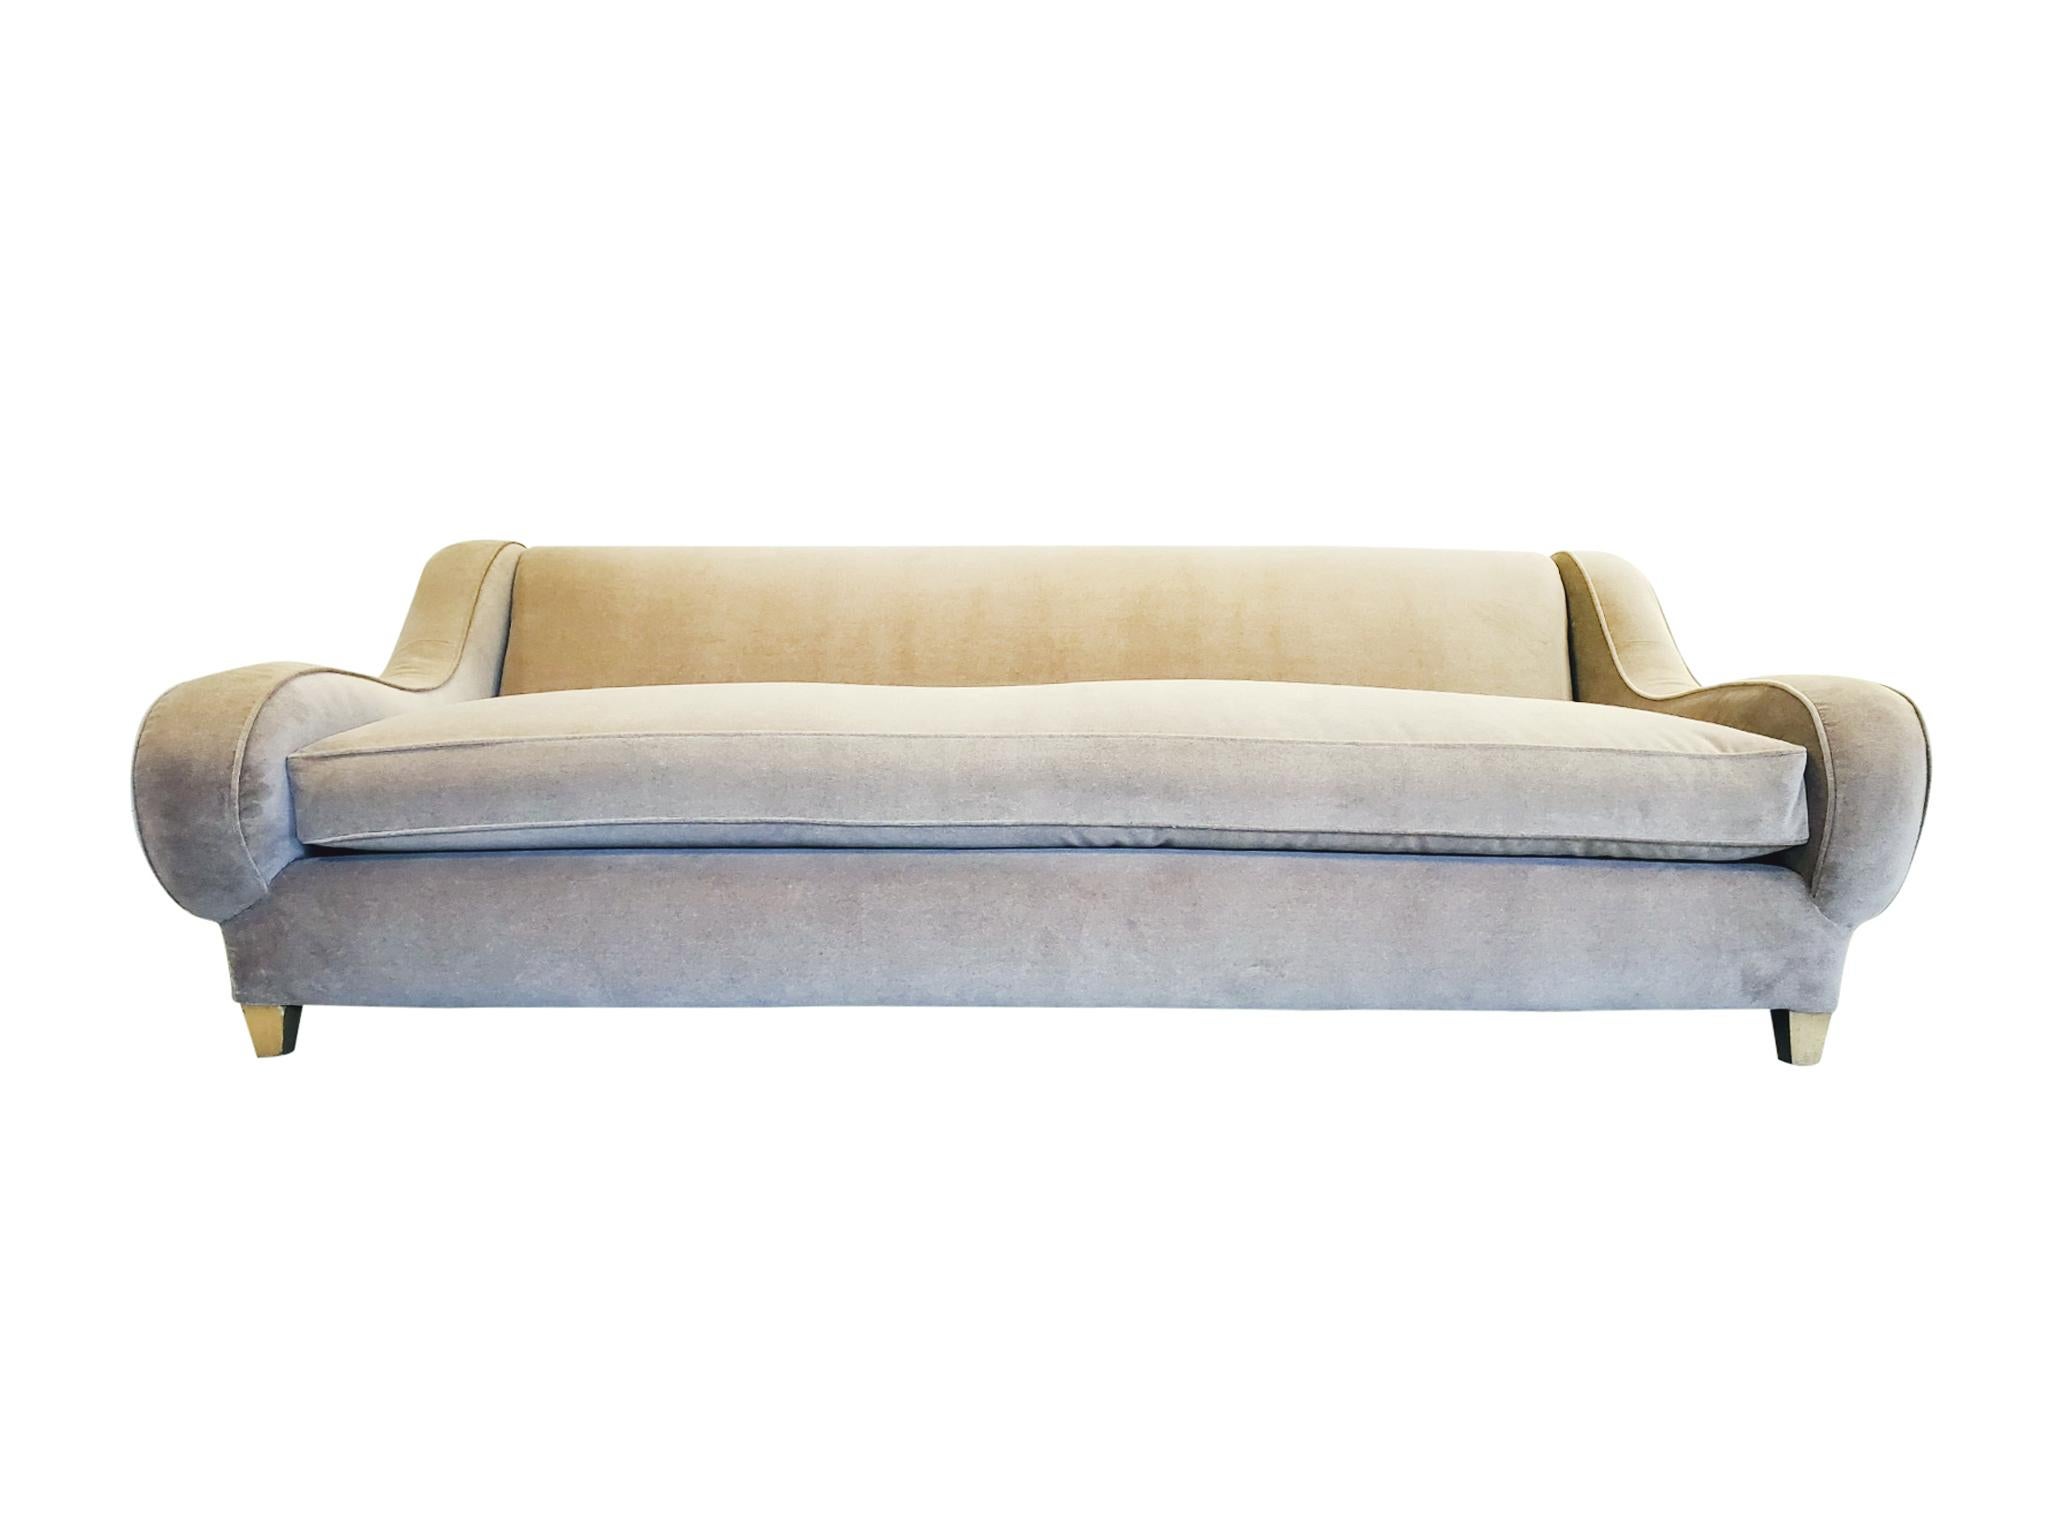 Mid-20th century sofa designed by James Mont. It is newly reupholstered in a taupe-toned velvet mohair. The elegant design is one of smooth lines and curves. We particularly love the flair of the sloping arms! A beautifully chic sofa for any